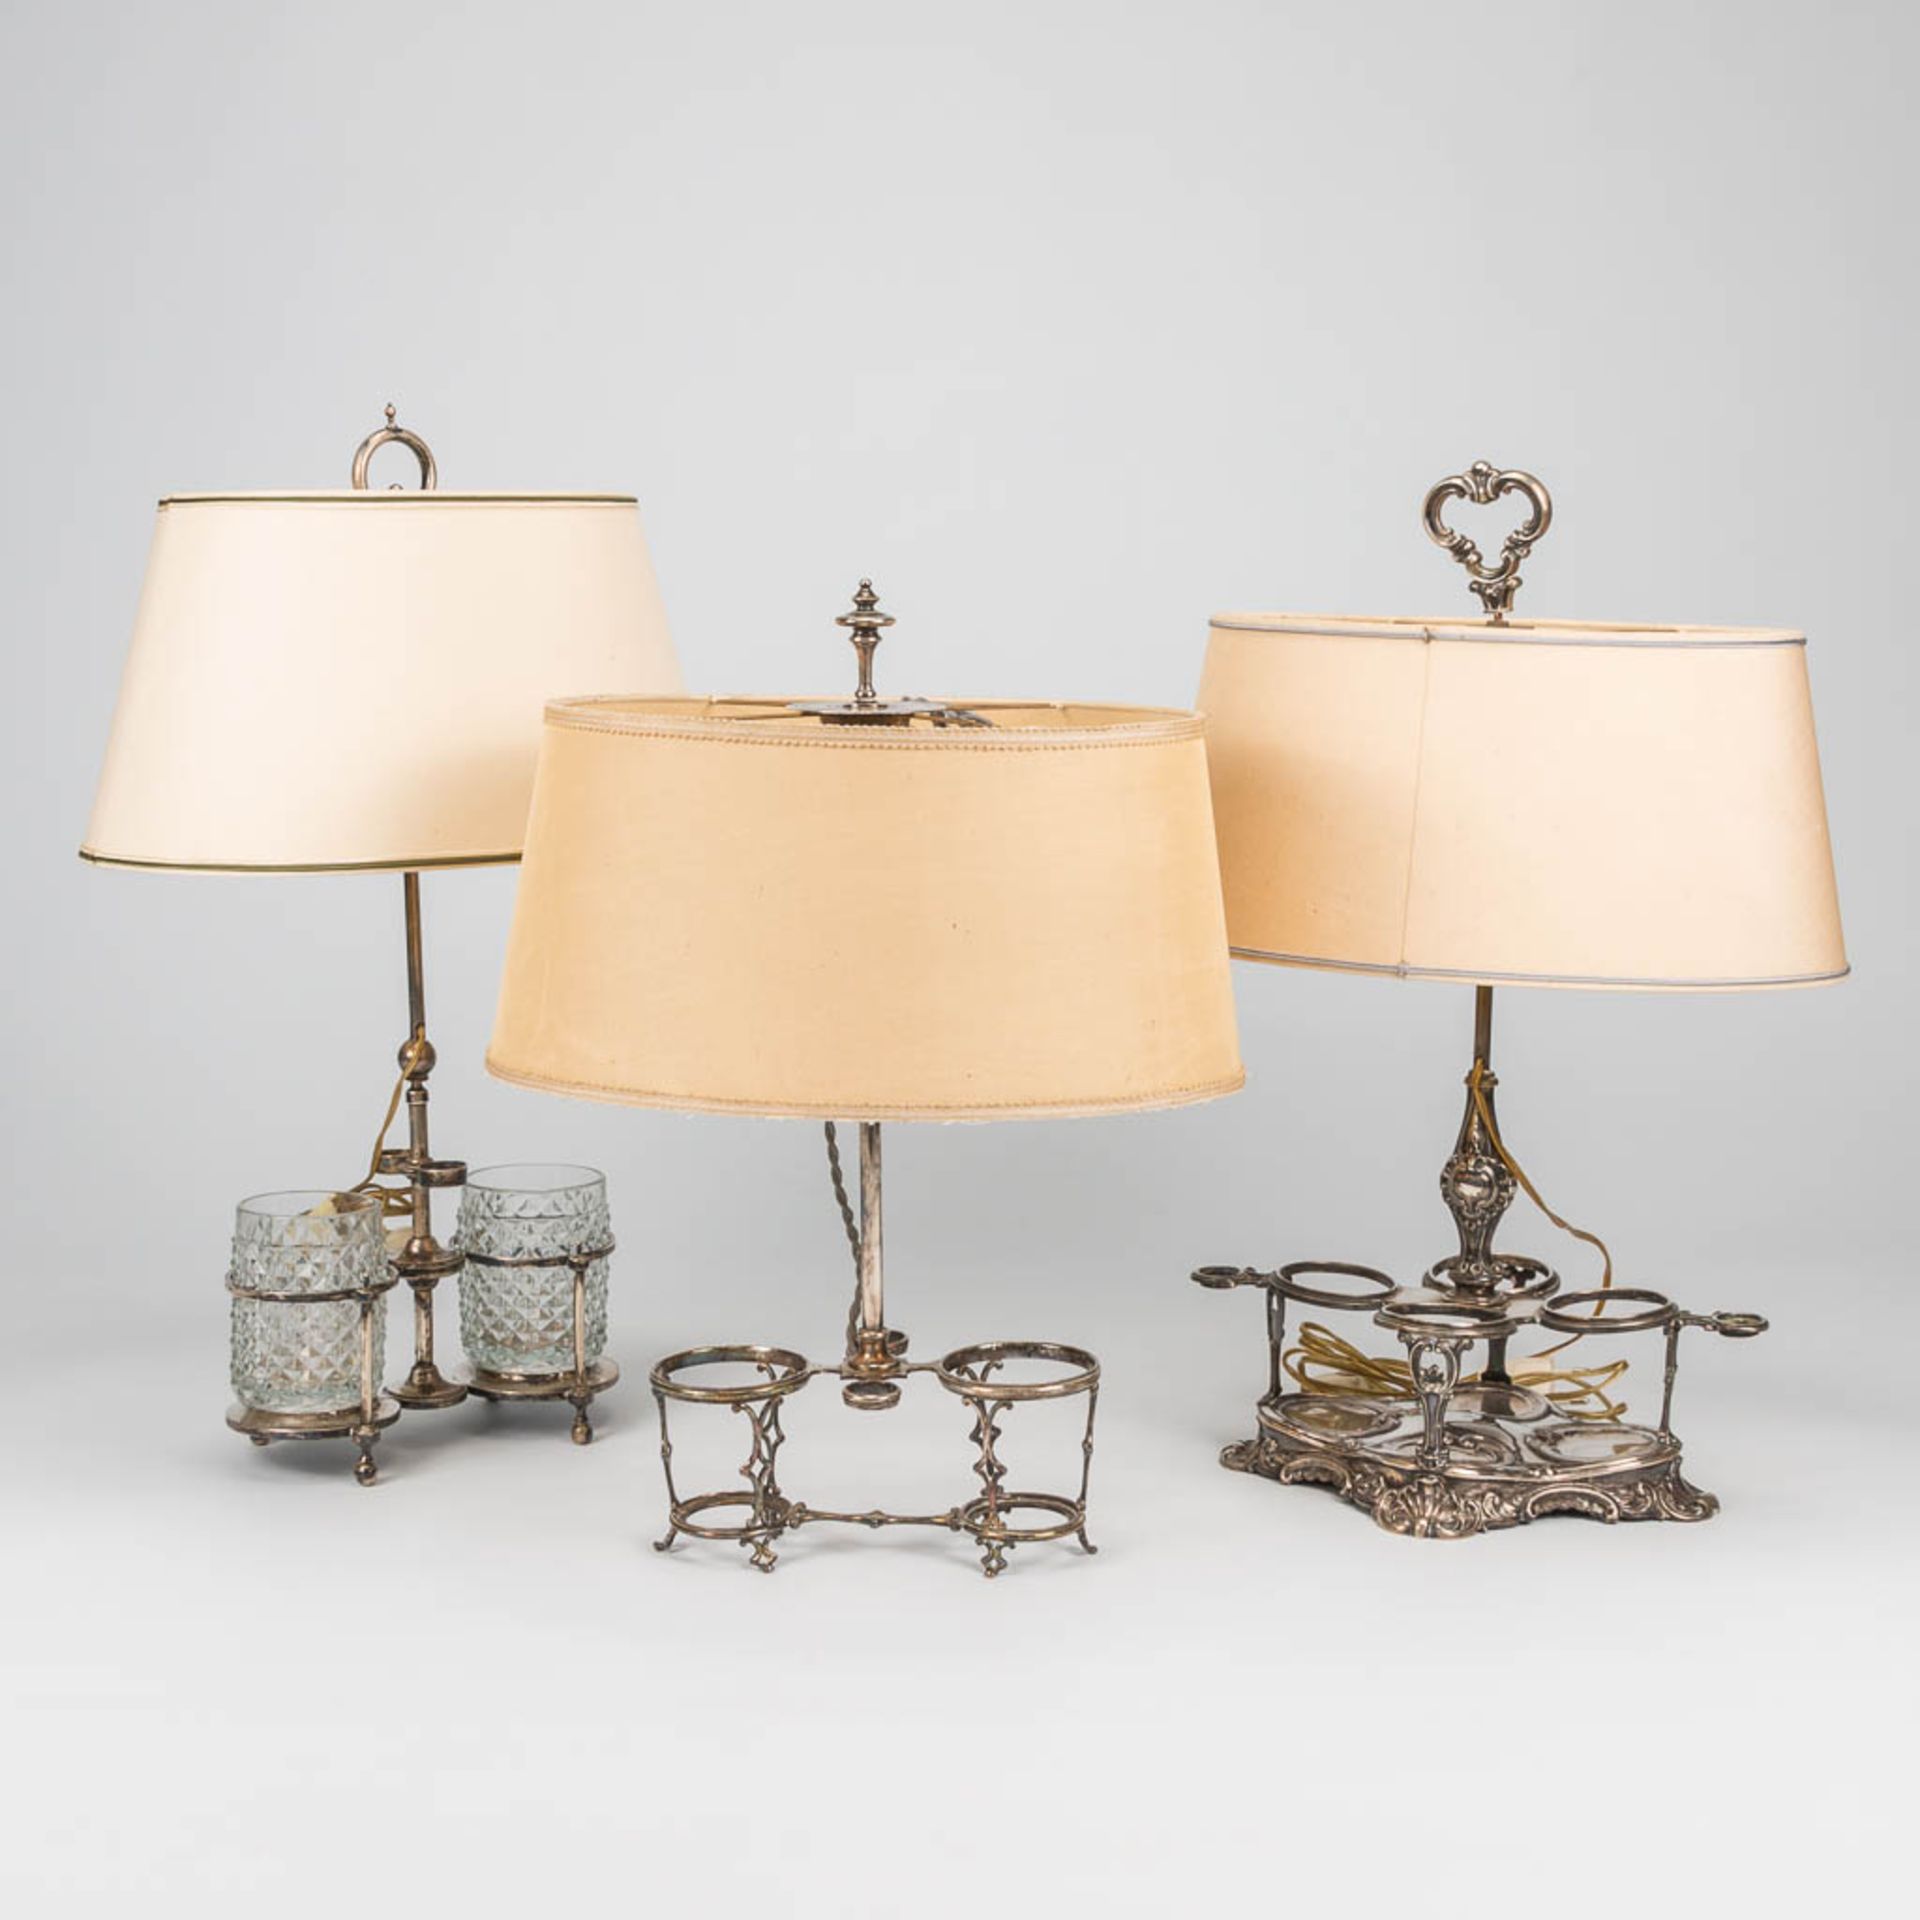 A collection of 2 silver and 1 silver-plated oil and vinegar set, of which table lamps were made. (7